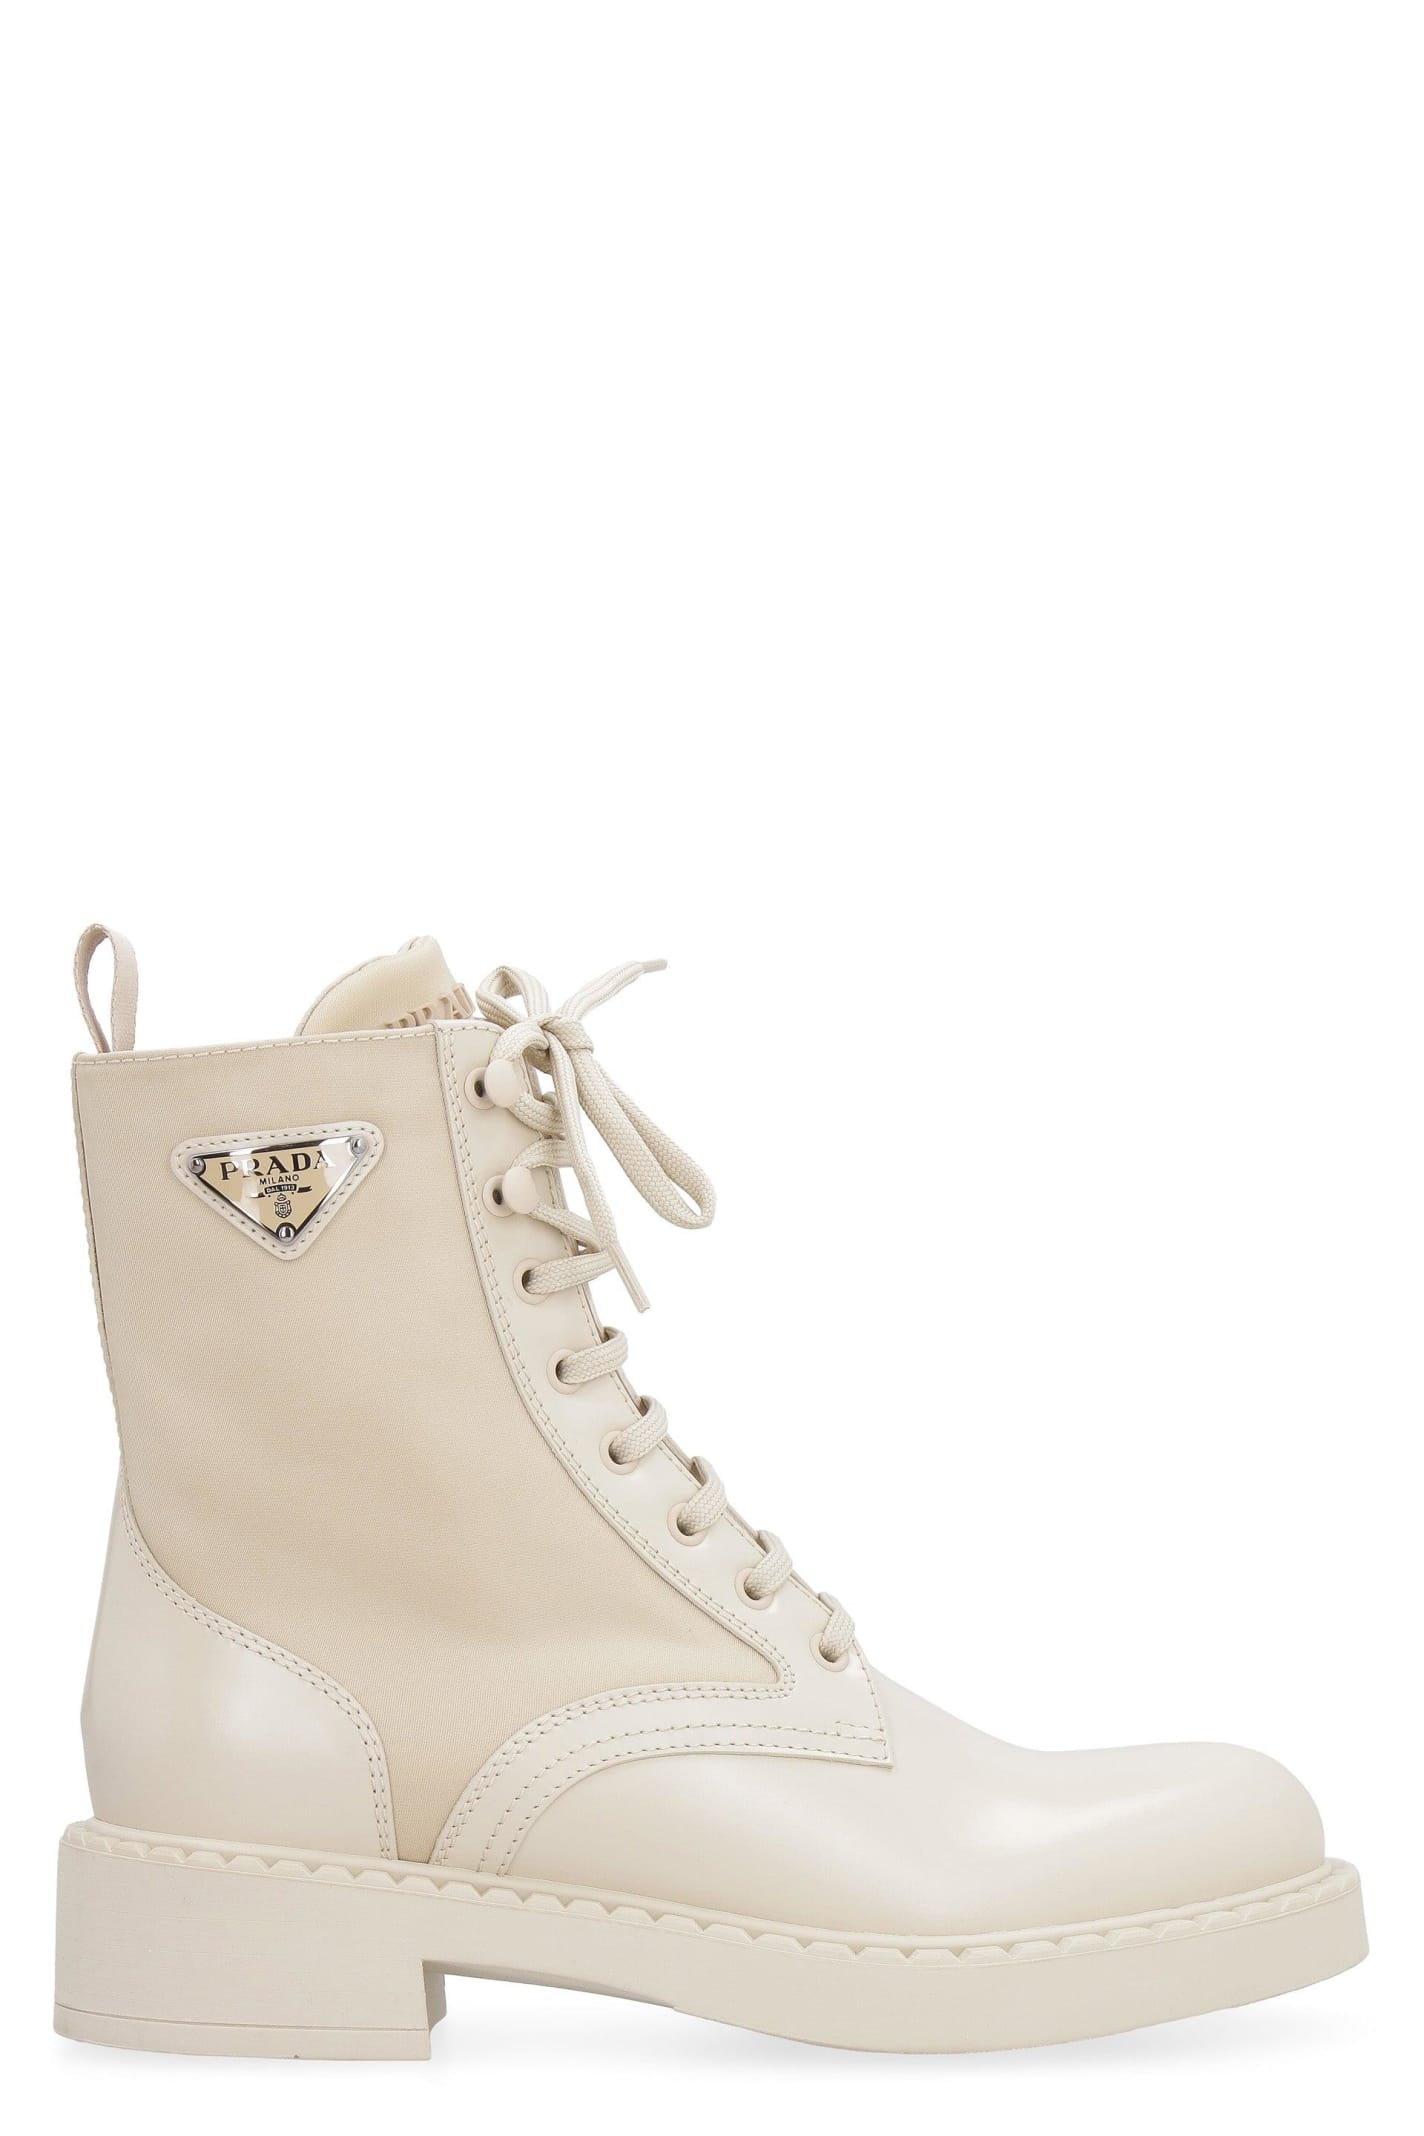 Prada Logo Patch Lace-up Boots